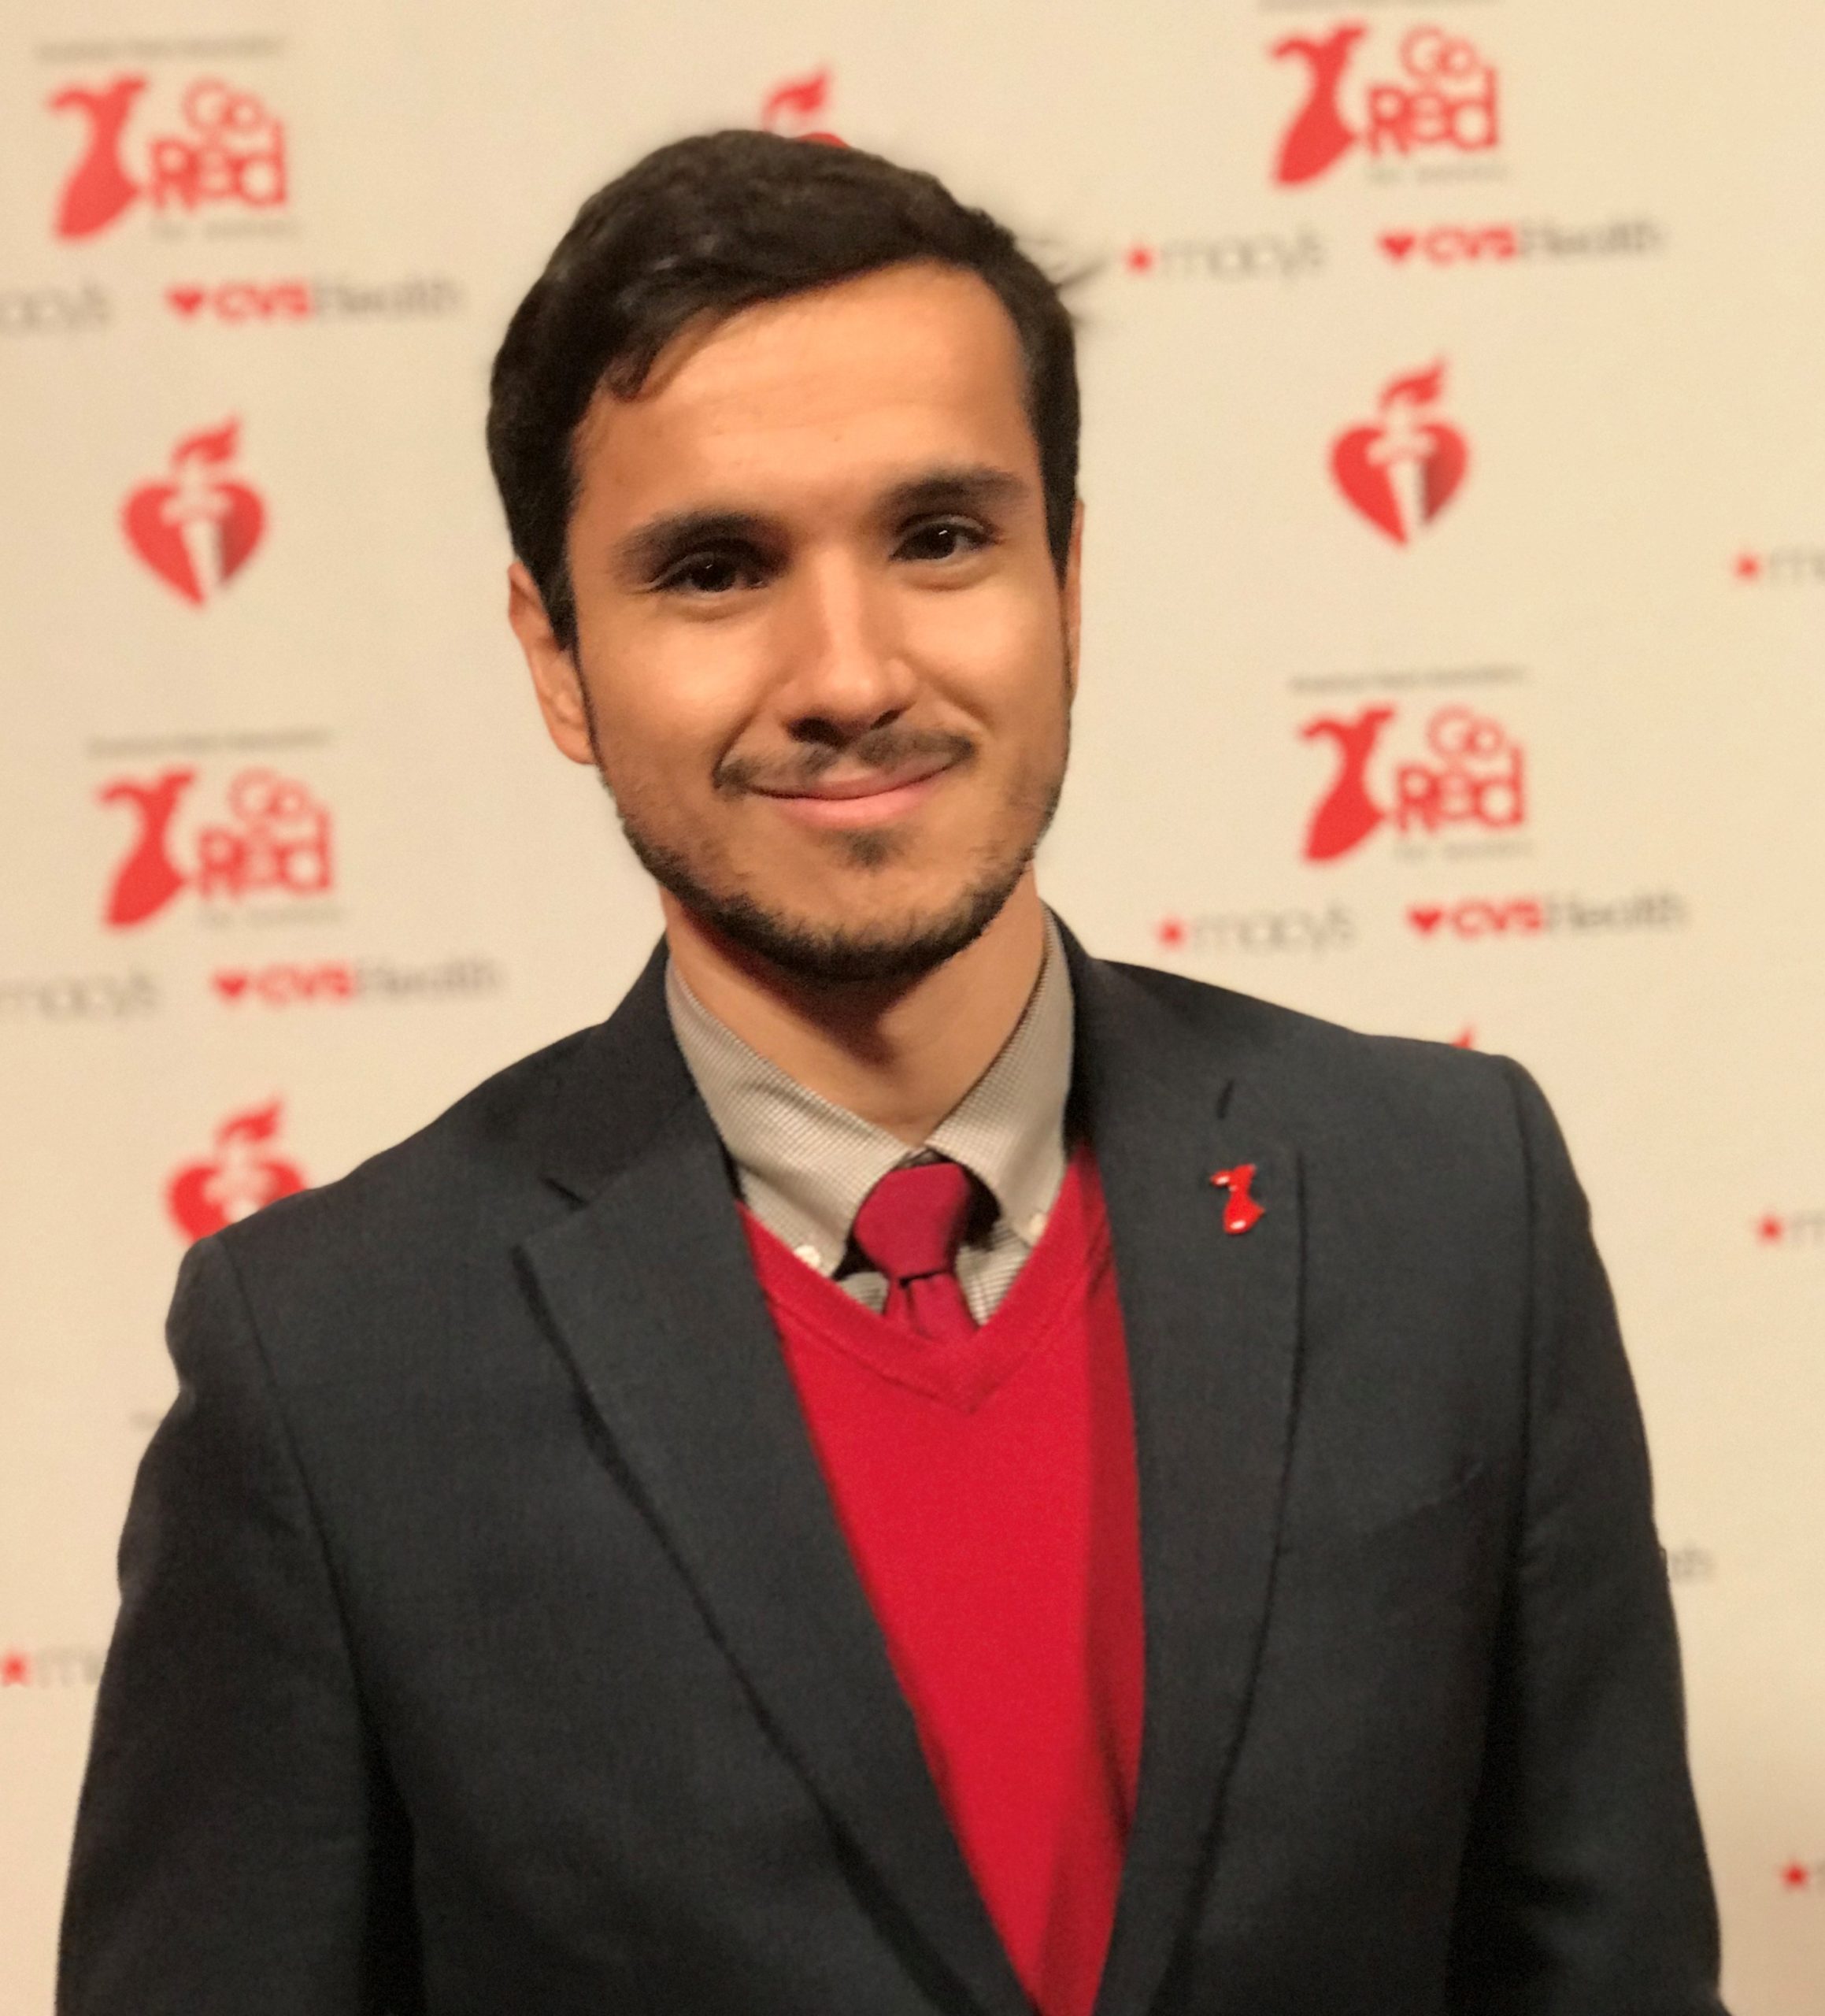 New York City doctor to receive ‘Basic Research Prize’ at AHA Scientific Sessions 2020